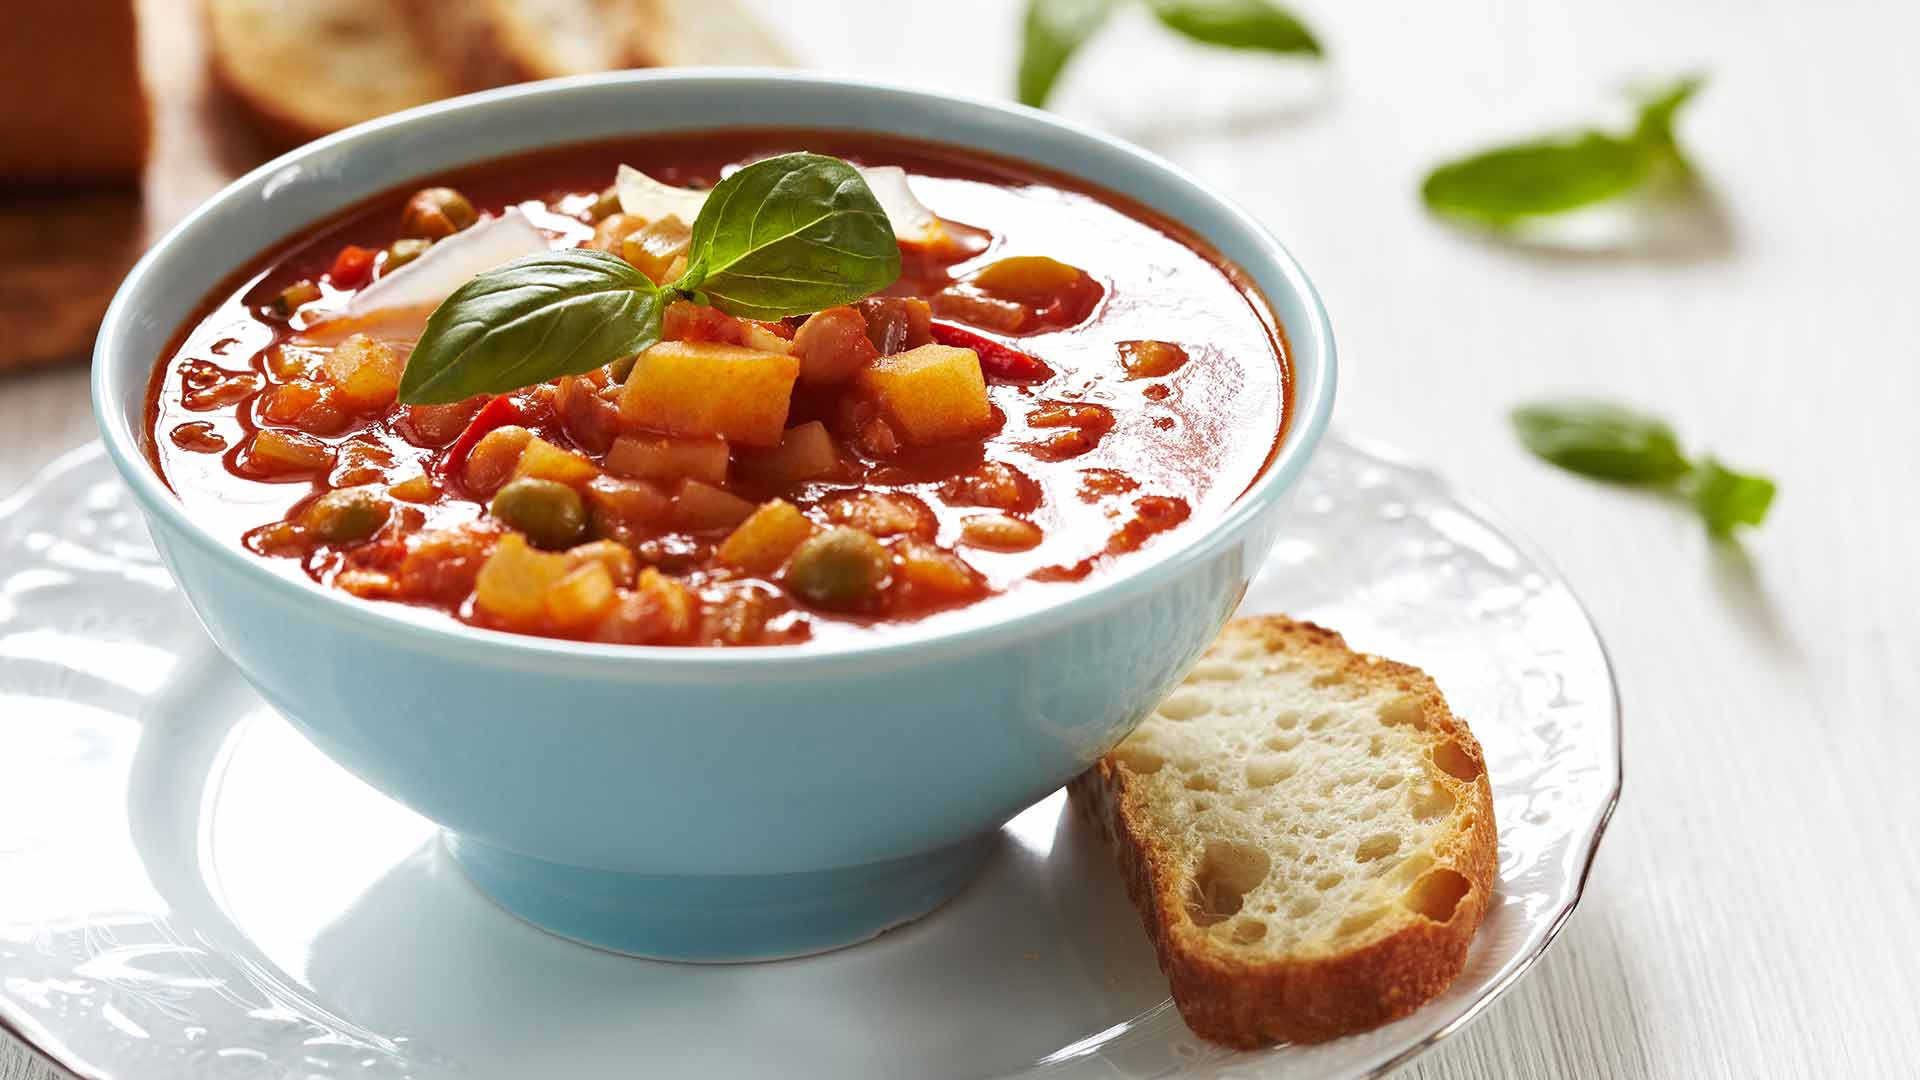 Italian Minestrone soup made with rich vegetables and pasta